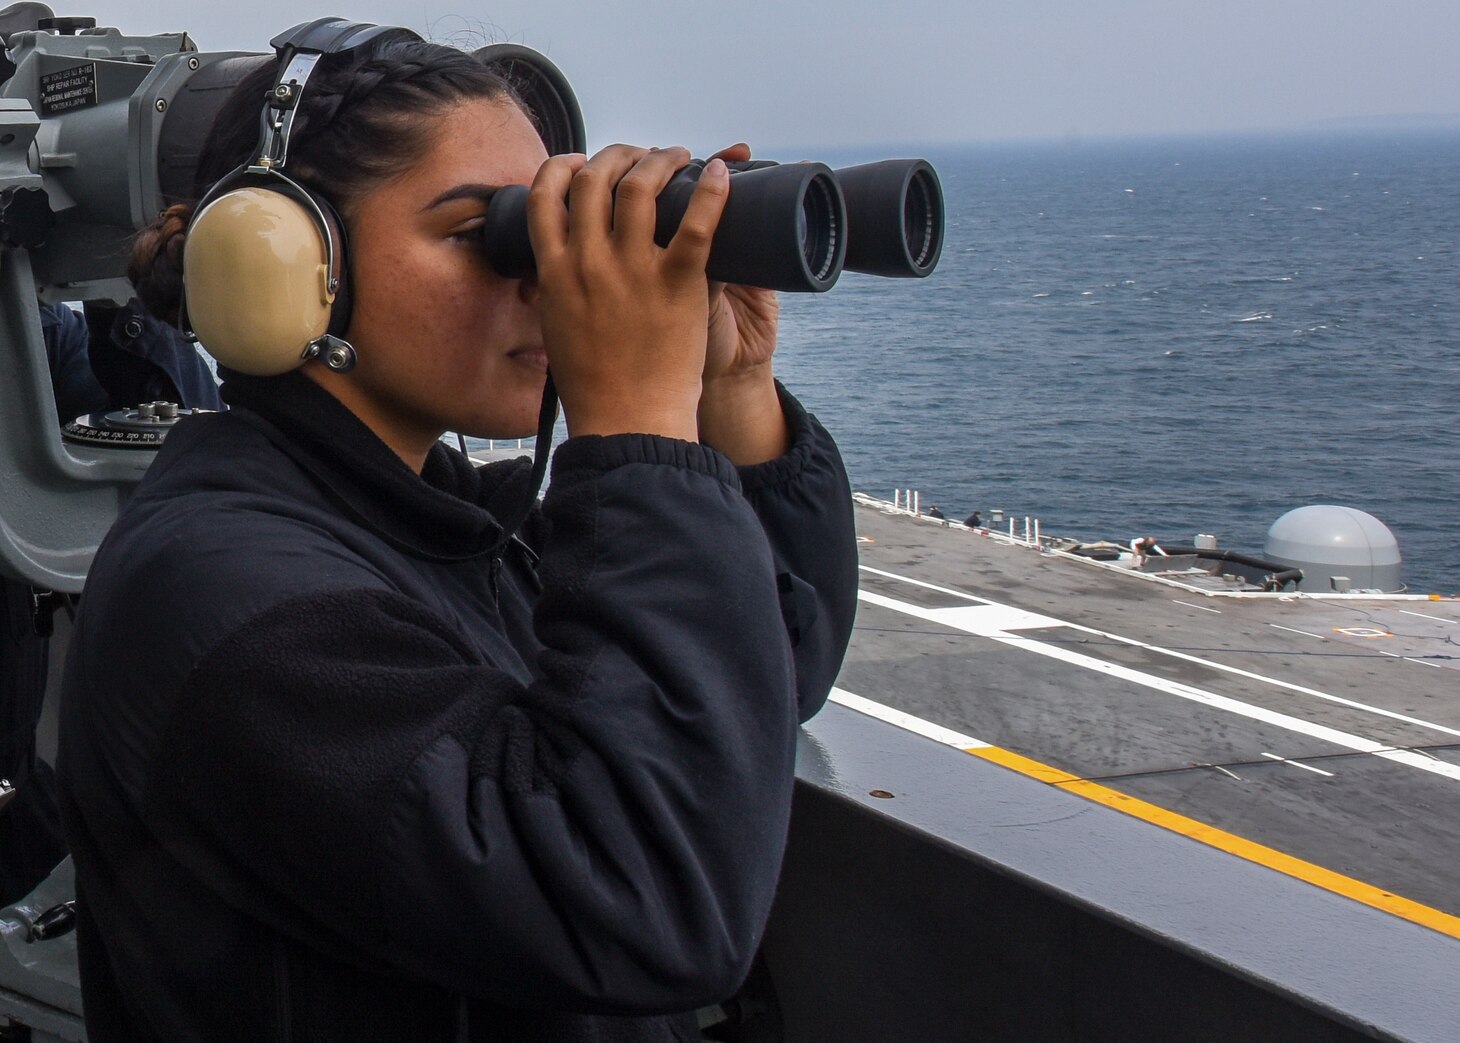 Operations Specialist Seaman Apprentice Stephanie Cruz, from San Diego, California, and Operations Specialist 3rd Class James Harrell, from St. Louis, Illinois, stand port-side lookout on vultures' row of the Navy's forward-deployed aircraft carrier, USS Ronald Reagan (CVN 76), as the ship returns to Commander, Fleet Activities Yokosuka following sea trials. Ronald Reagan, the flagship of Carrier Strike Group 5, provides a combat-ready force that protects and defends the collective maritime interests of its allies and partners in the Indo-Asia-Pacific region.